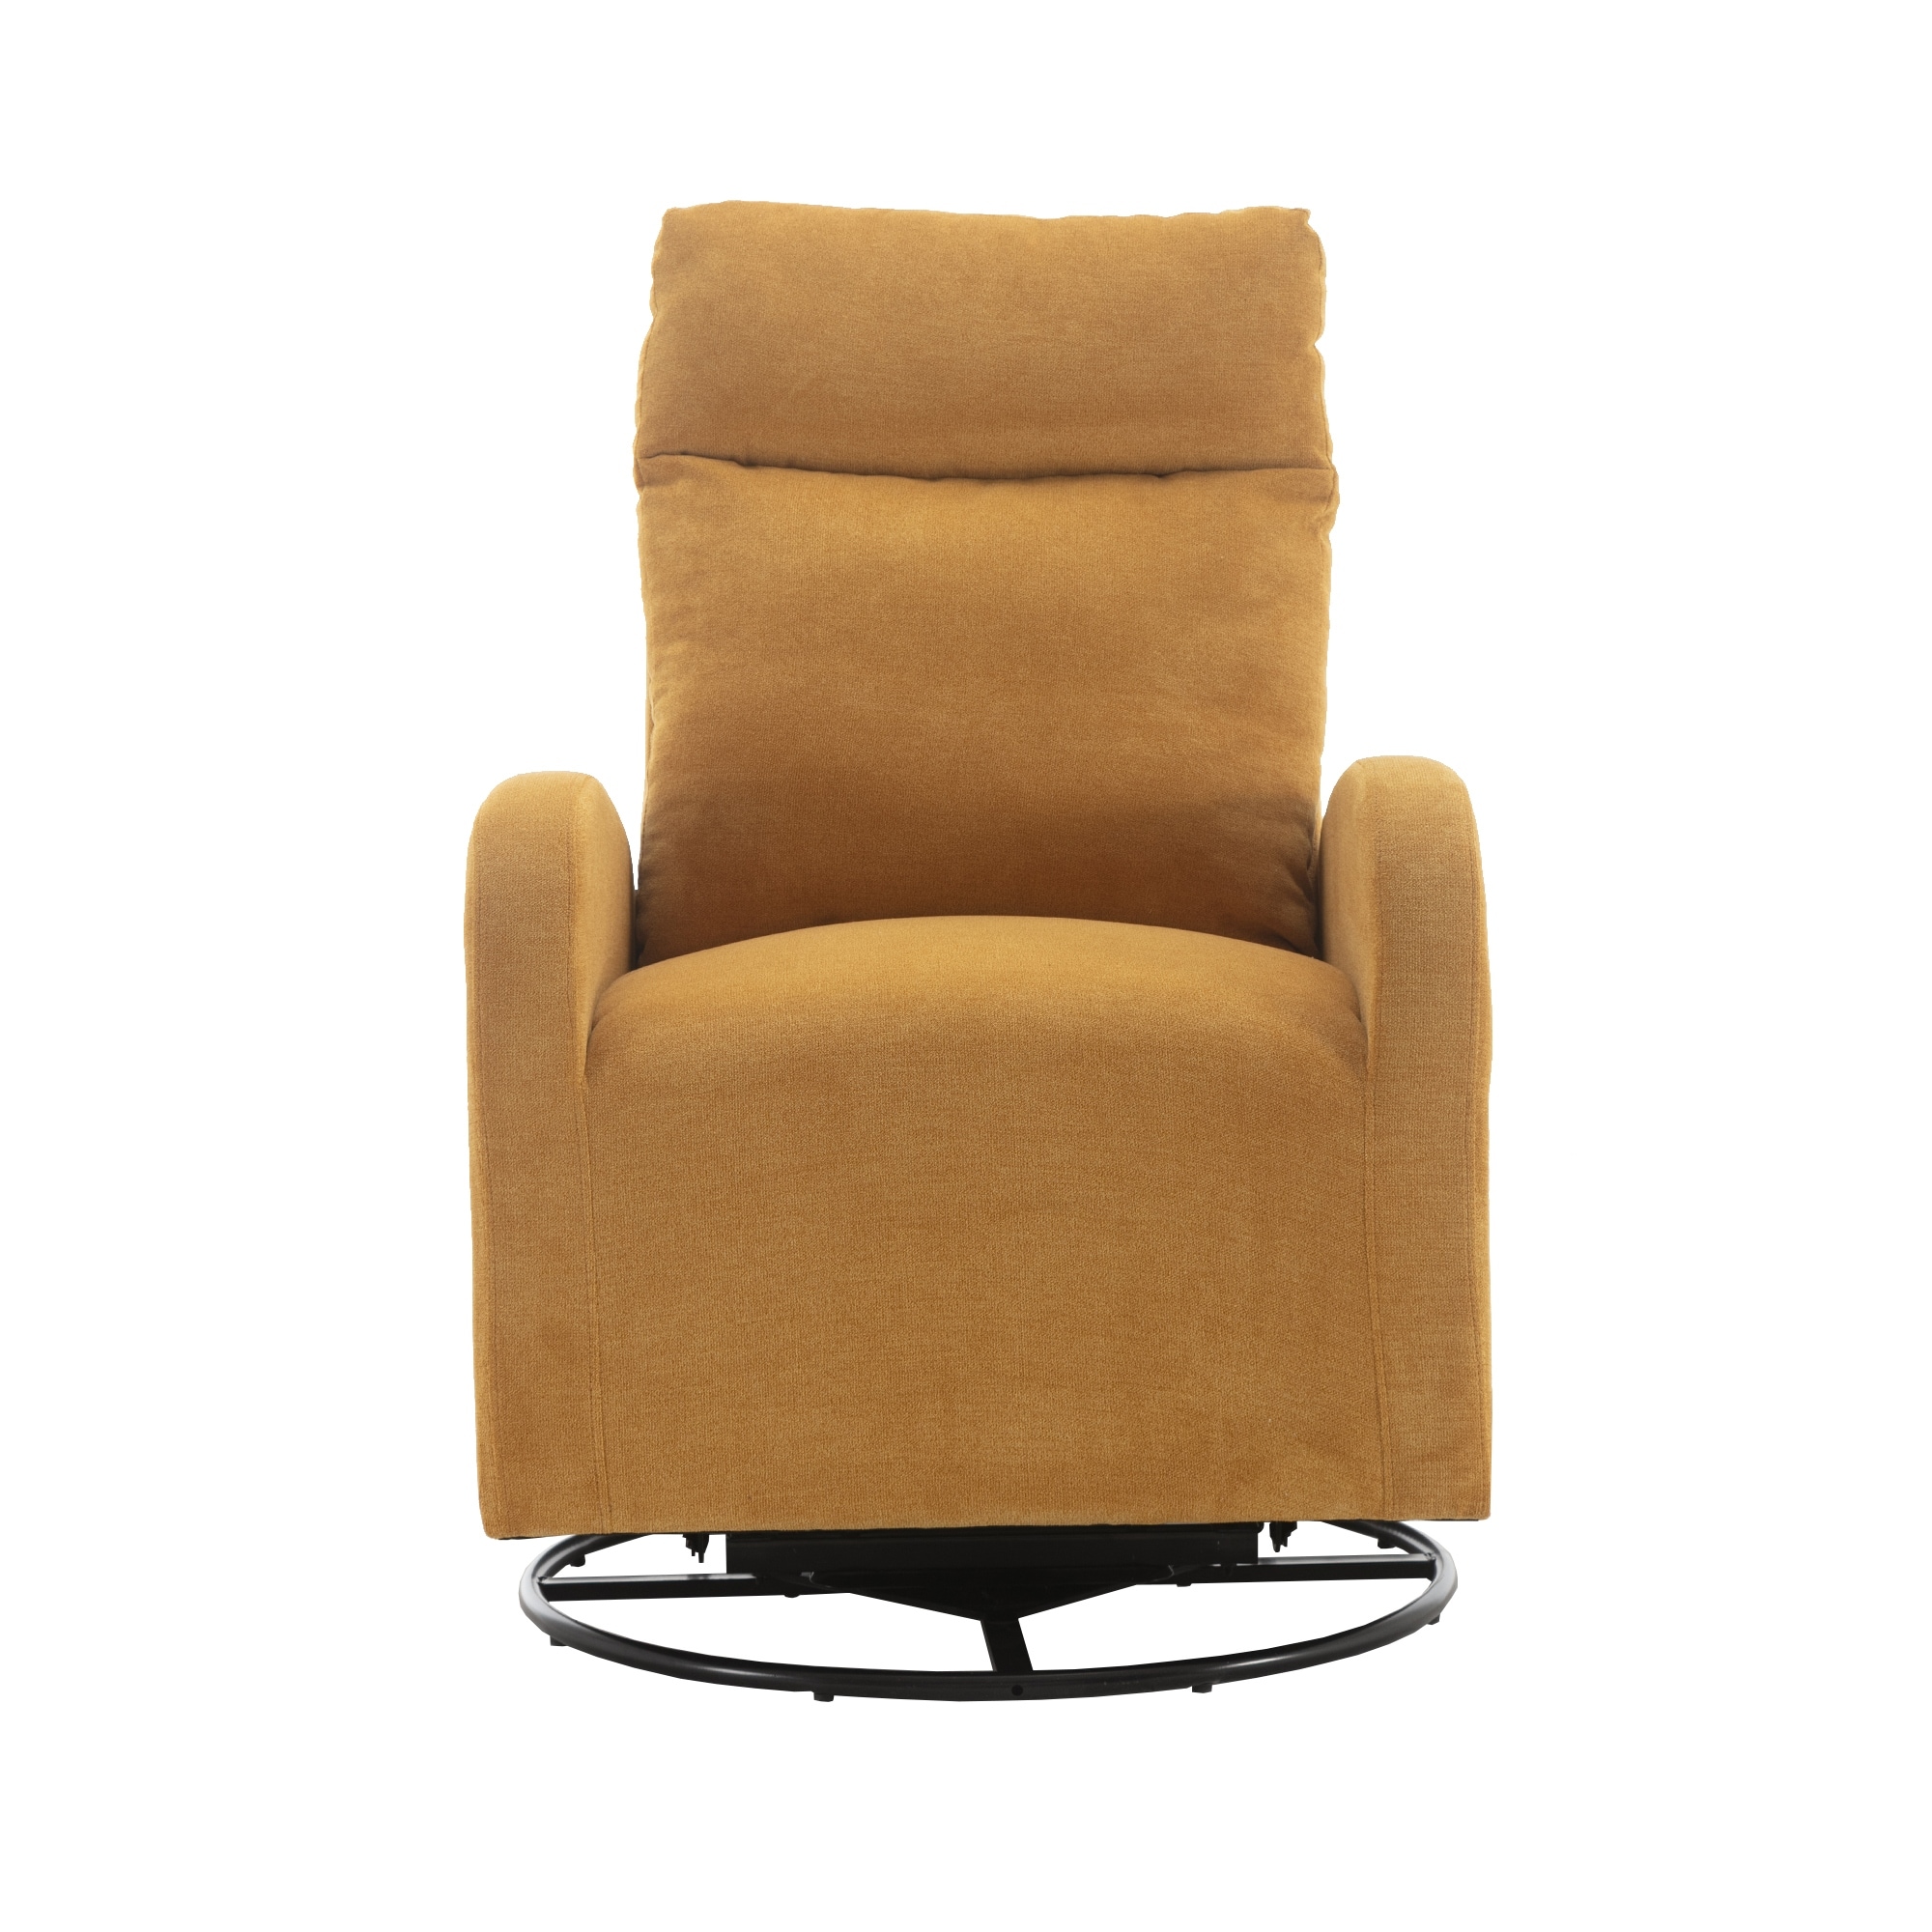 Swivel Rocking Chair Modern Accent Chairs with 1 Left Bag and Lounge Upholstered Swivel Glider Arm Chairs Sofa, Yellow